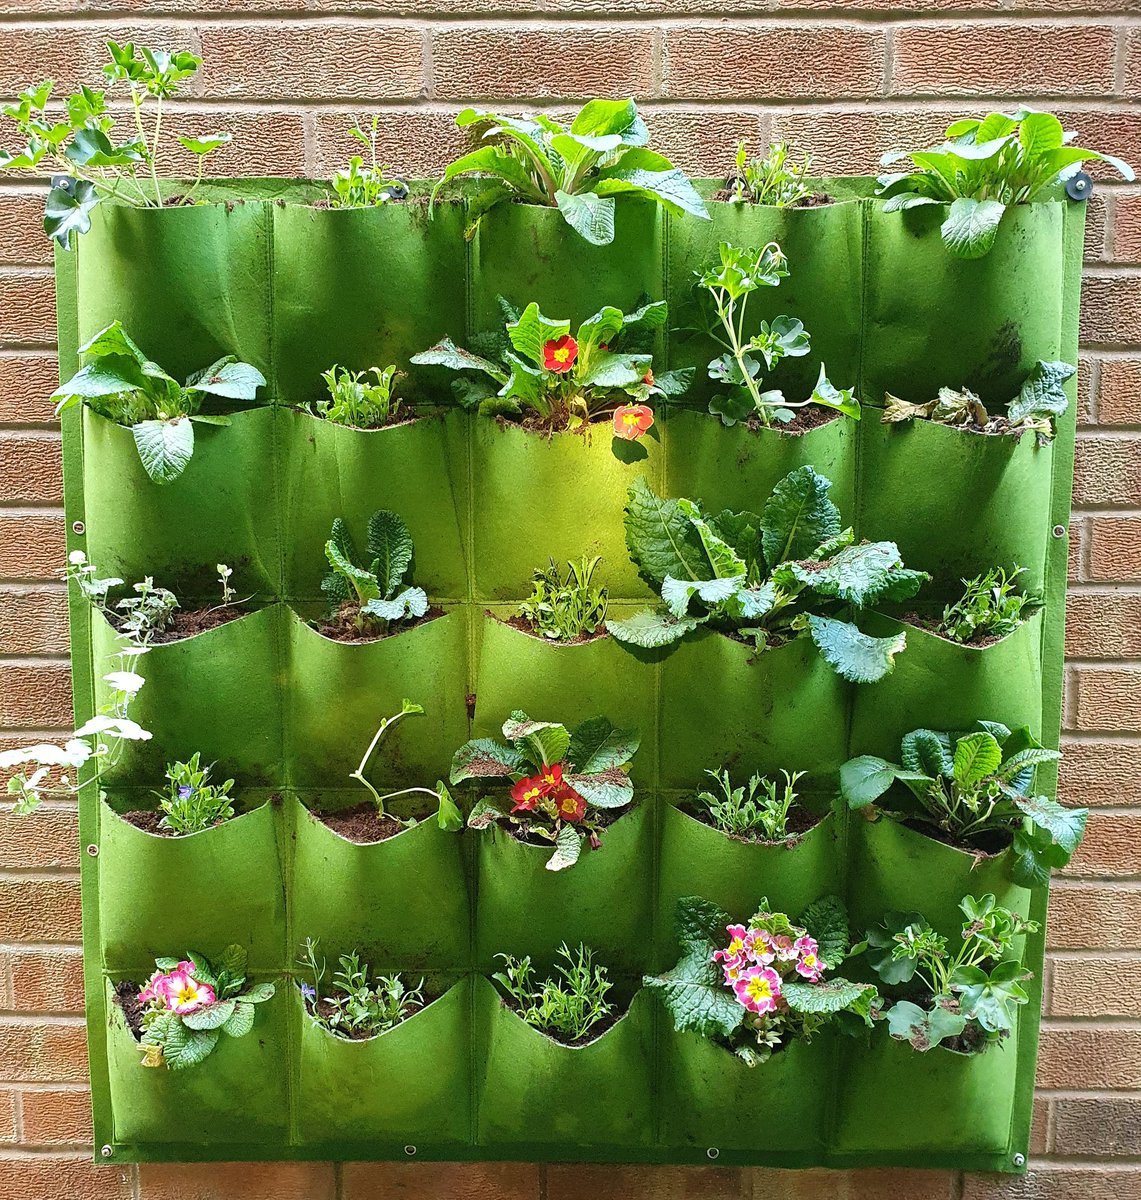 Completed my wall planter a few days ago... can't wait for it to start to thrive with the different varieties mingling together. #gardening #wallplanter #flowers #ideasforgardens #freshair #backgardenfreshenup pic.x.com/ll0nijik2h